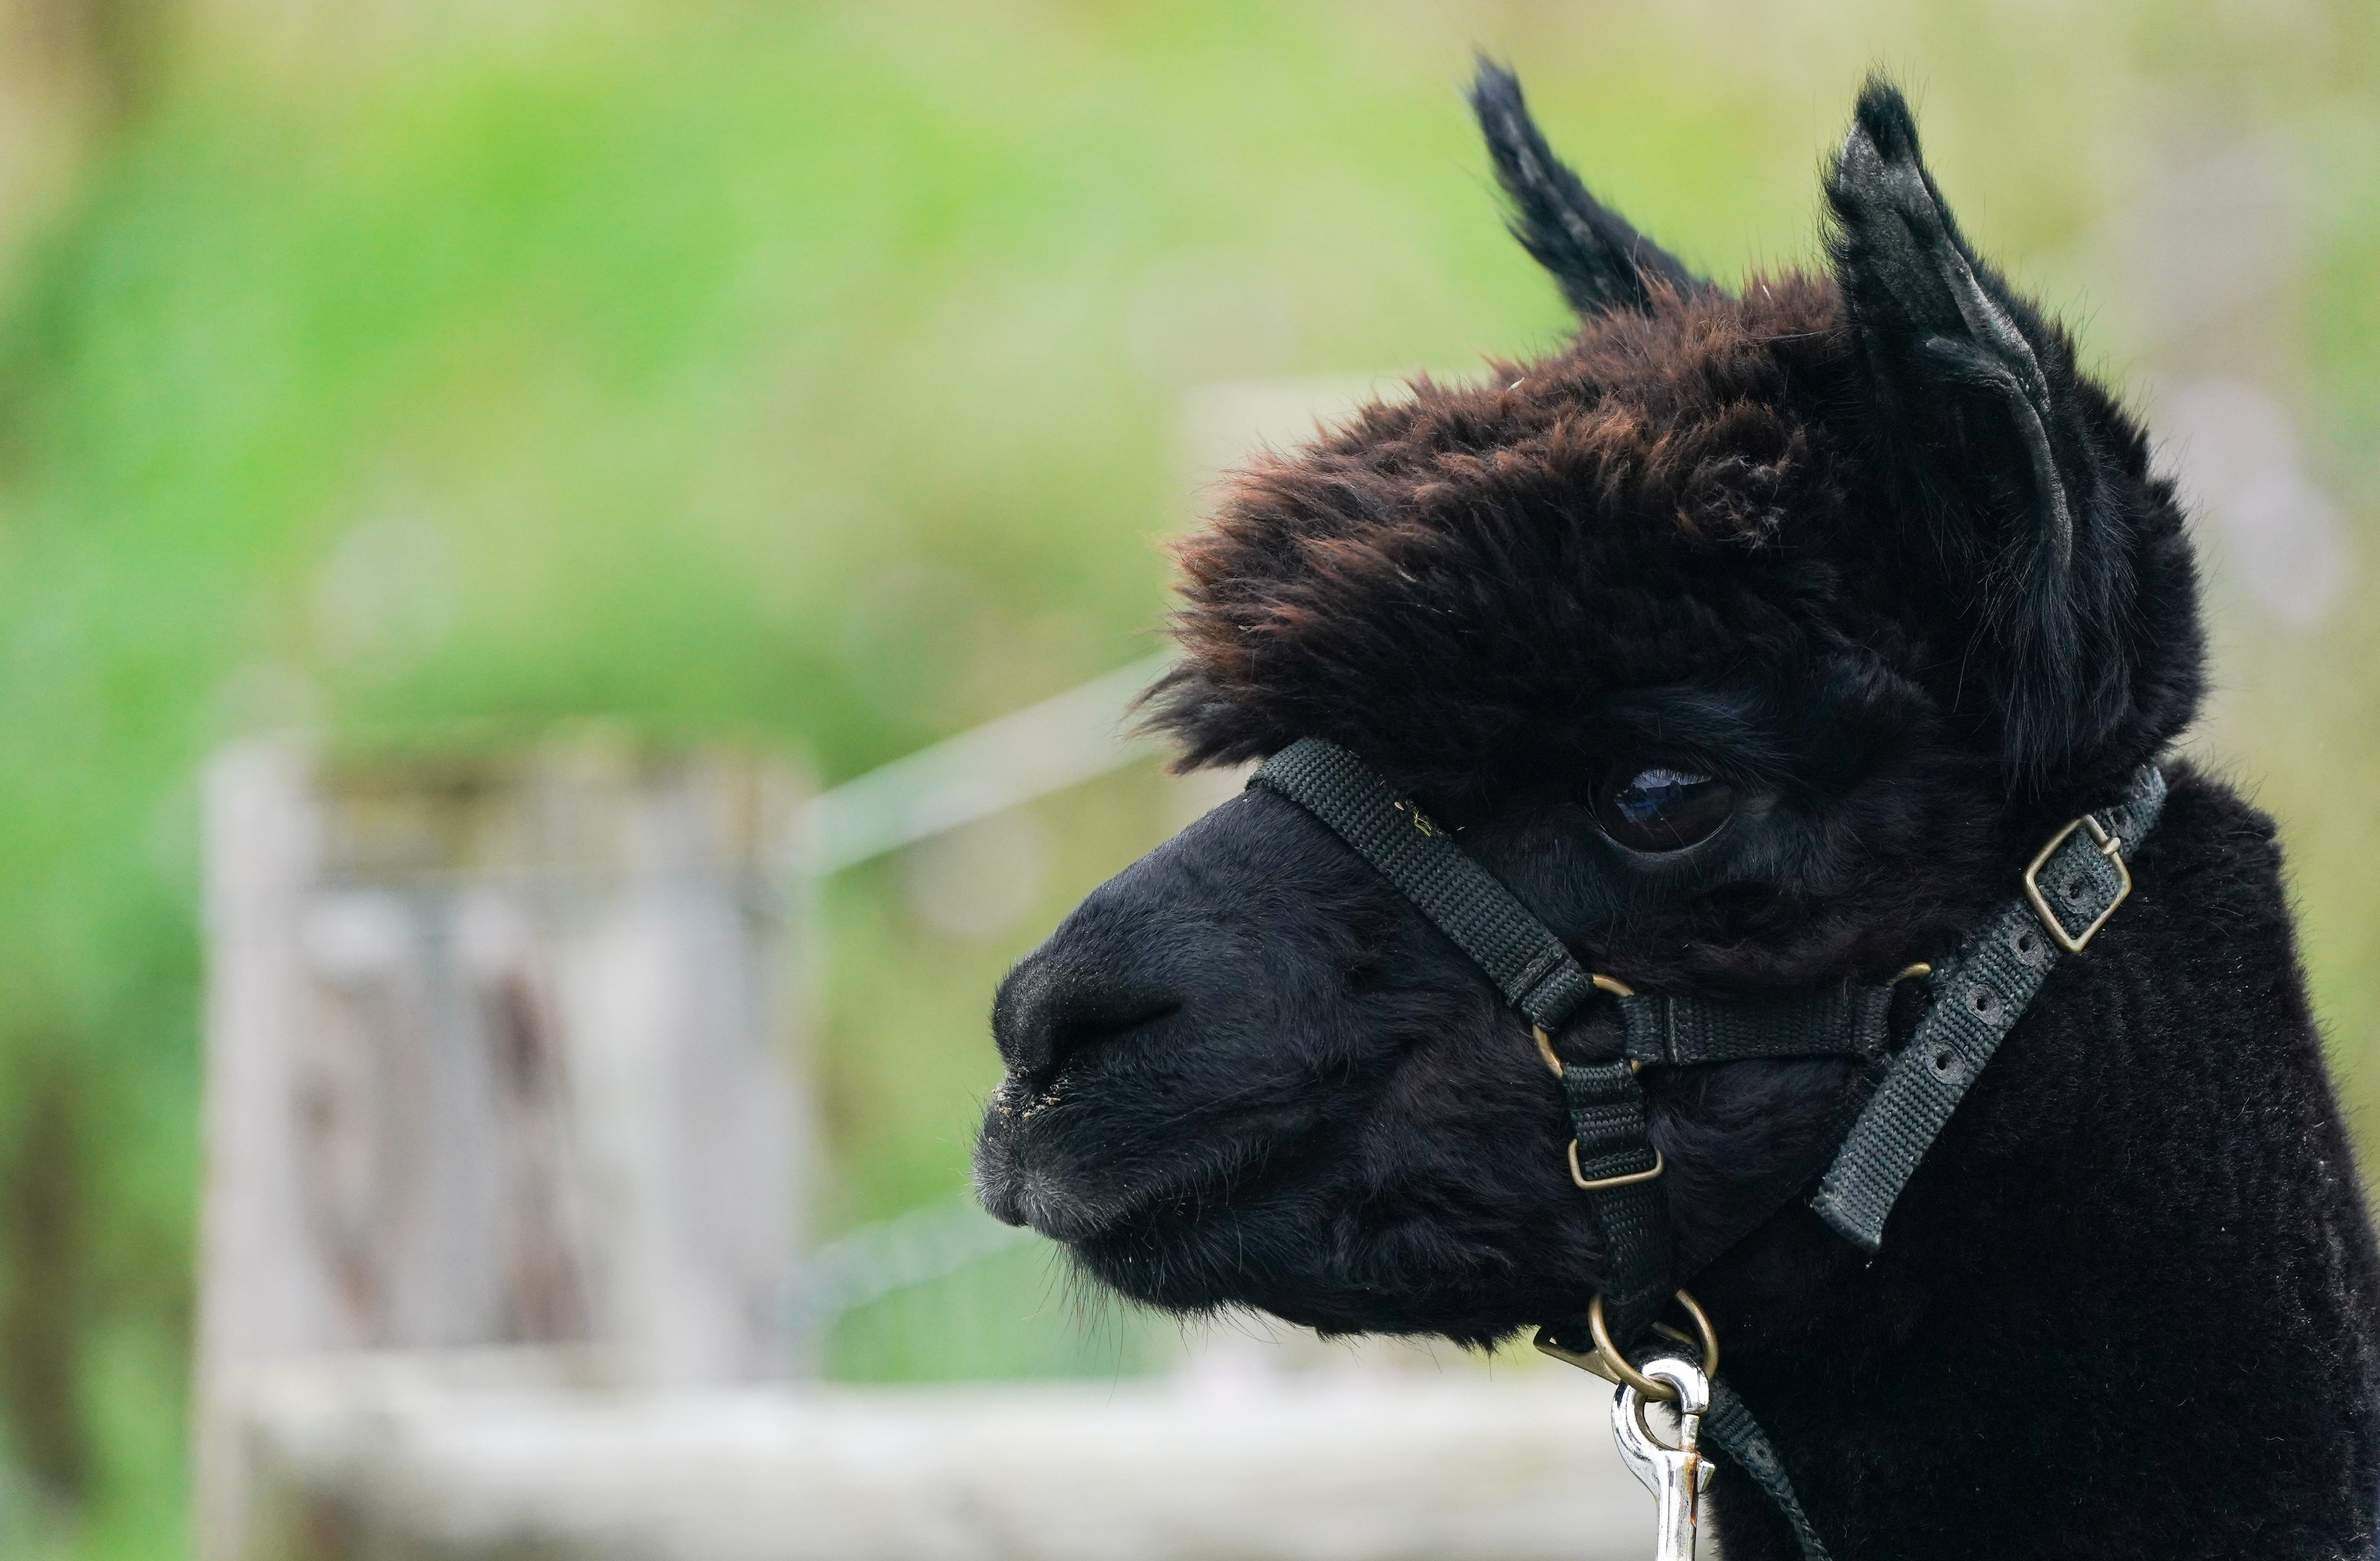 Campaigners led by owner Helen Macdonald fought long and hard to save Geronimo the alpaca after he twice tested positive for bovine tuberculosis but the story did not have a happy ending (Andrew Matthews/PA)